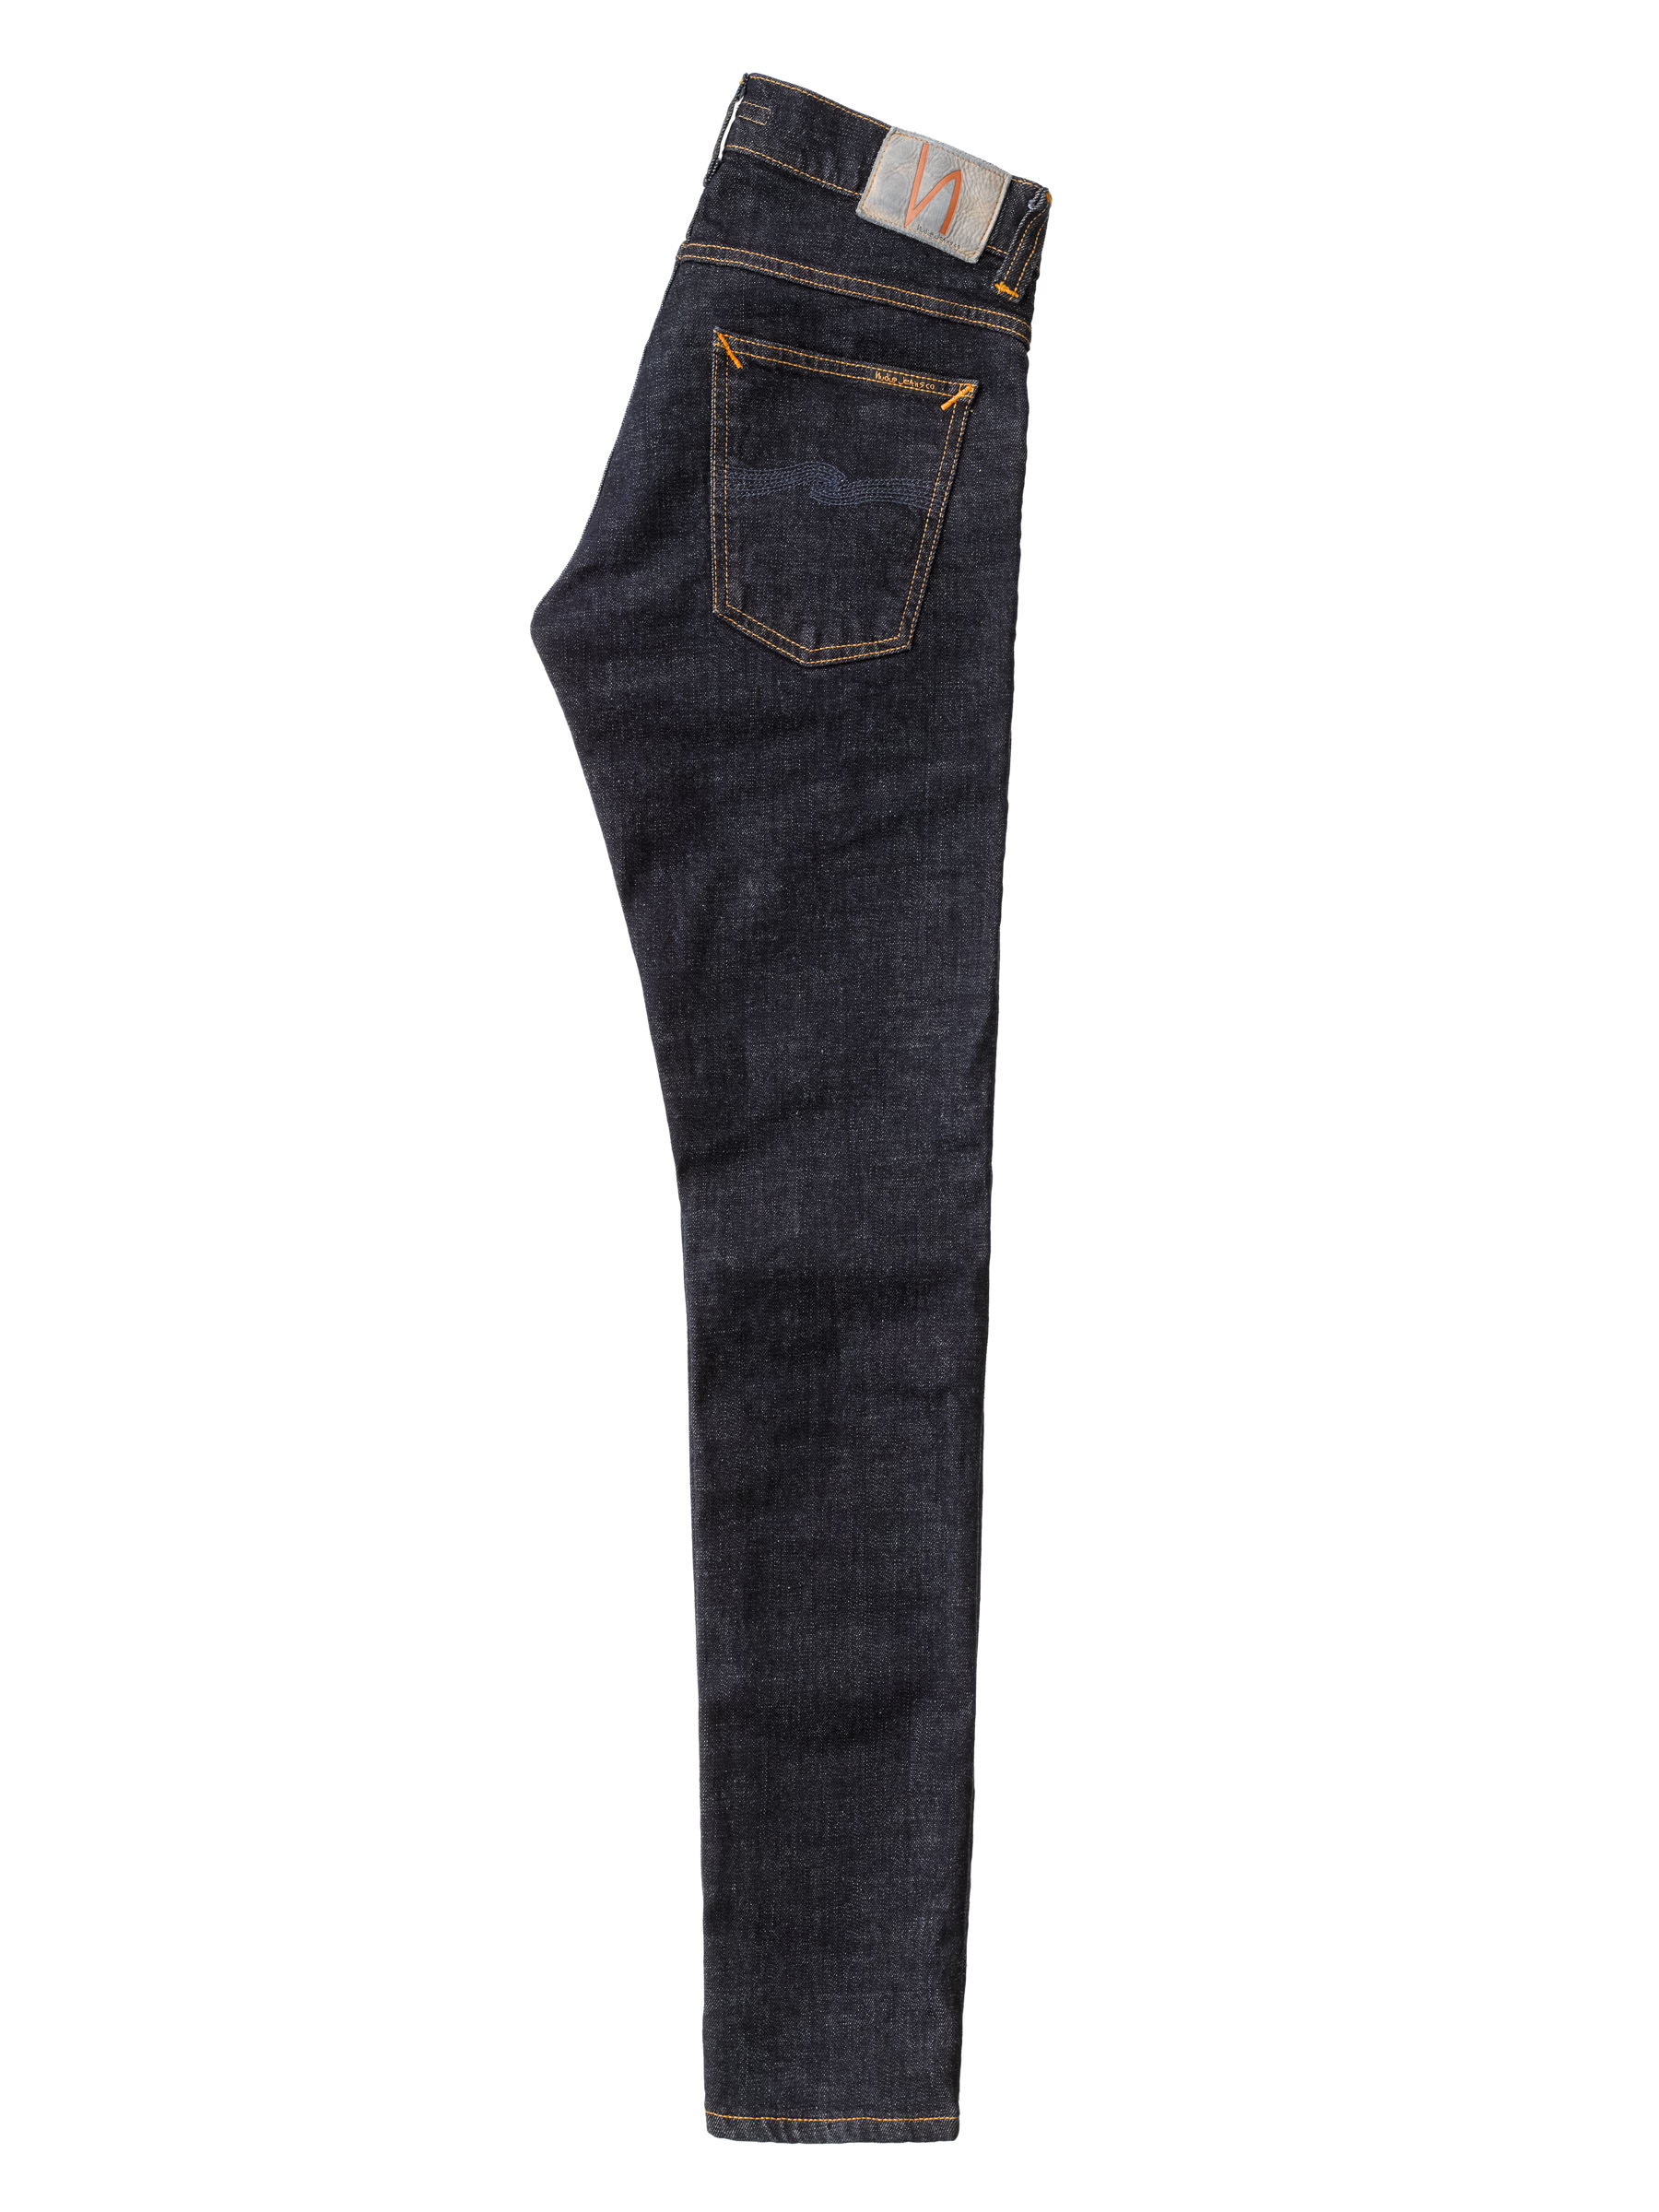 Nudie Jeans - TIGHT TERRY - Rinsed Twill